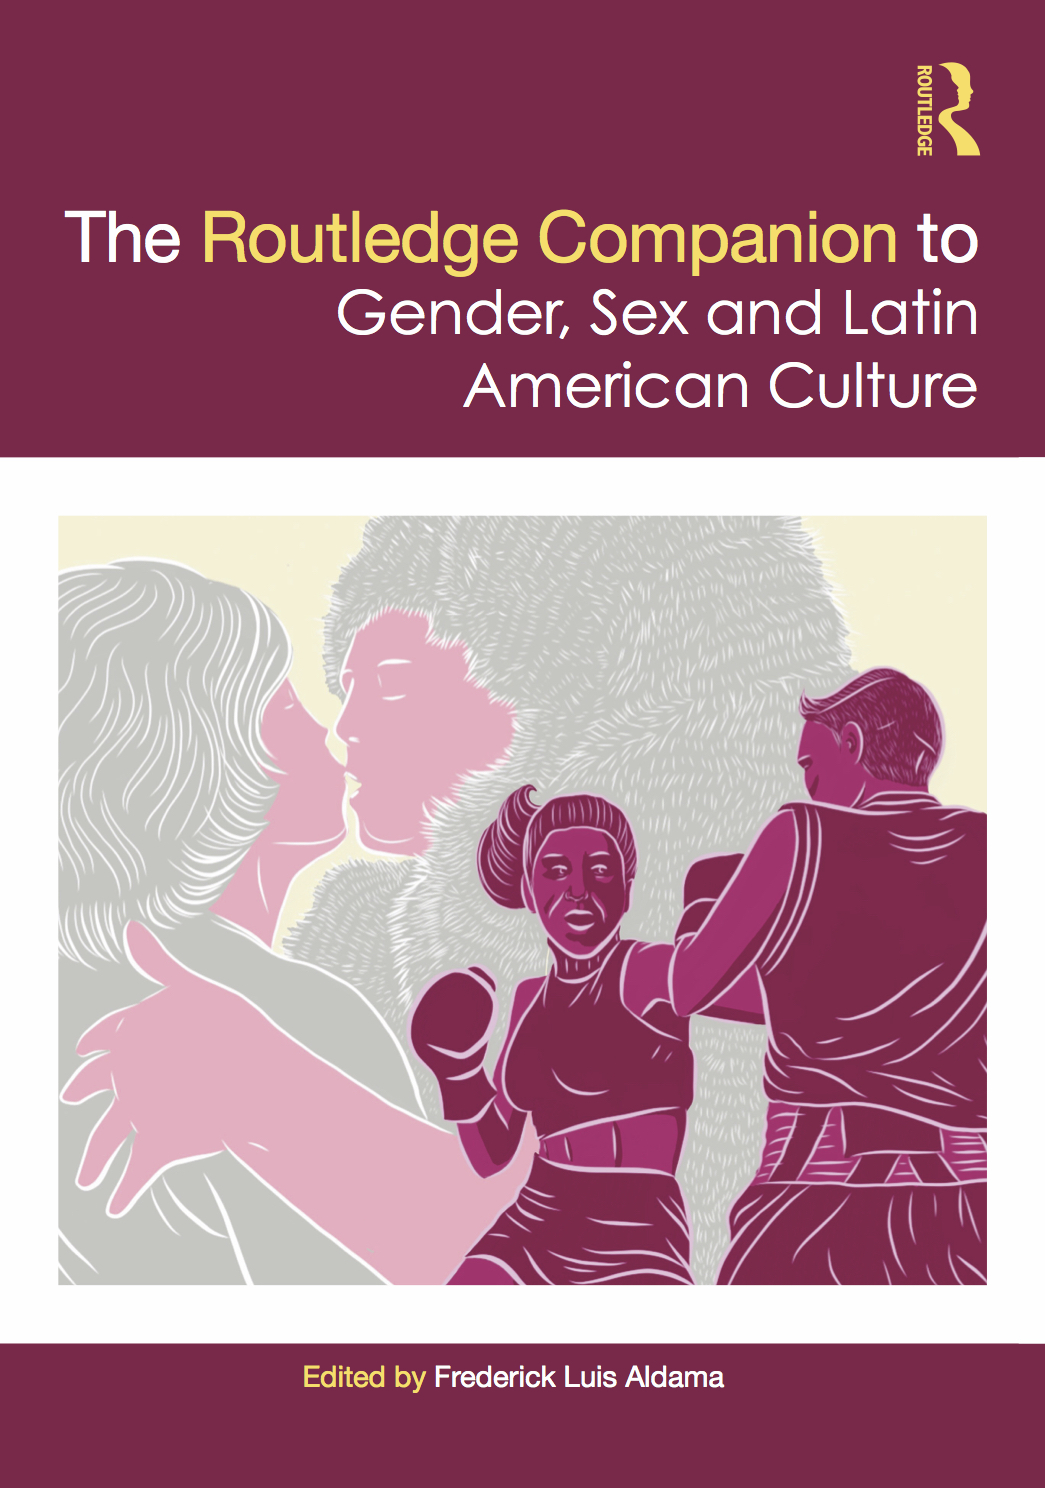 The Routledge Companion to Gender, Sex and Latin American Culture